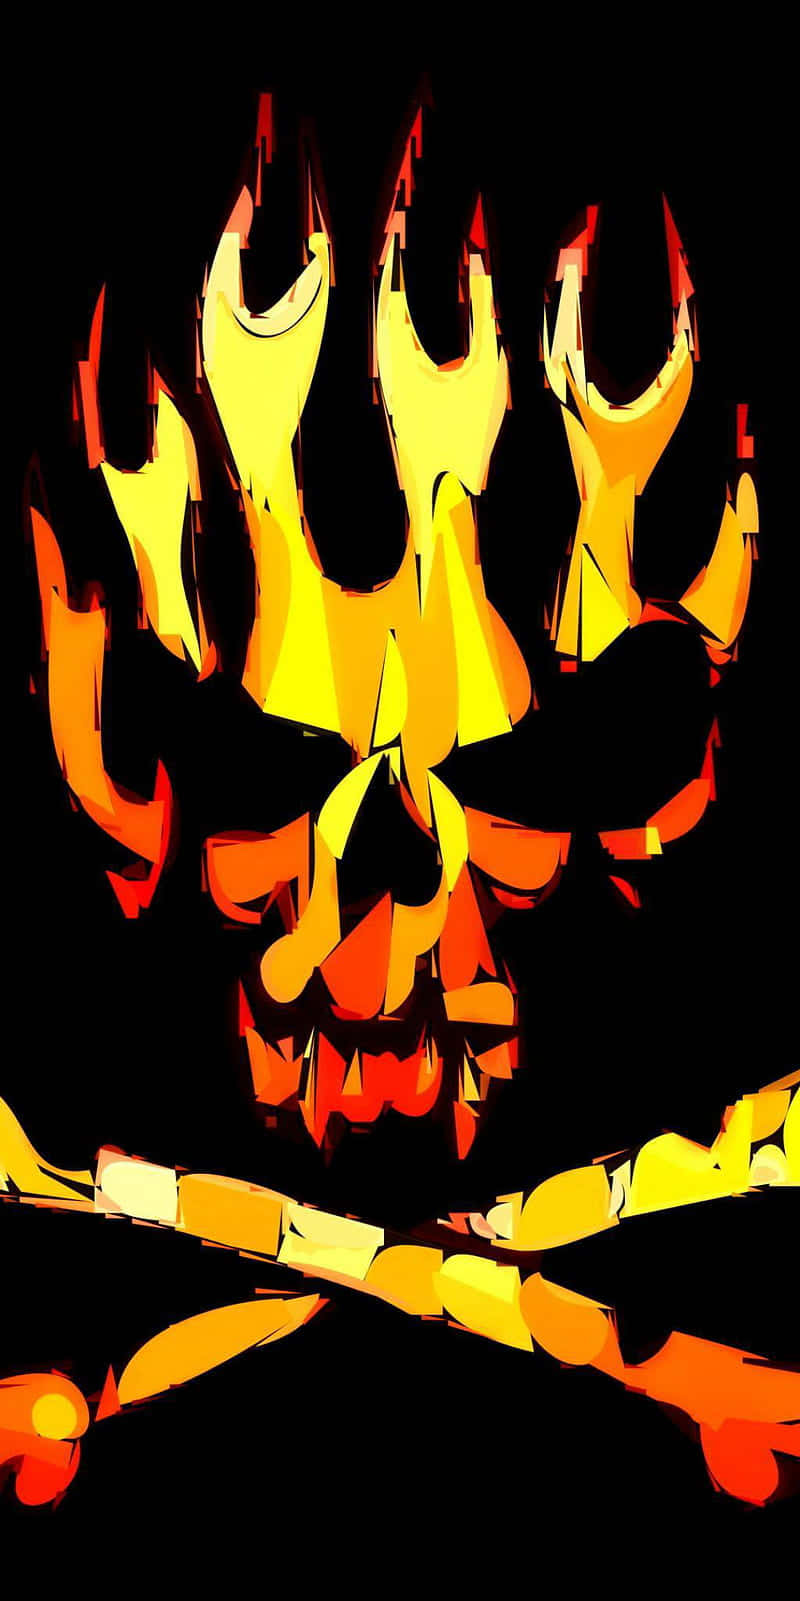 Burn bright and fierce with this Red Flame Skull Wallpaper